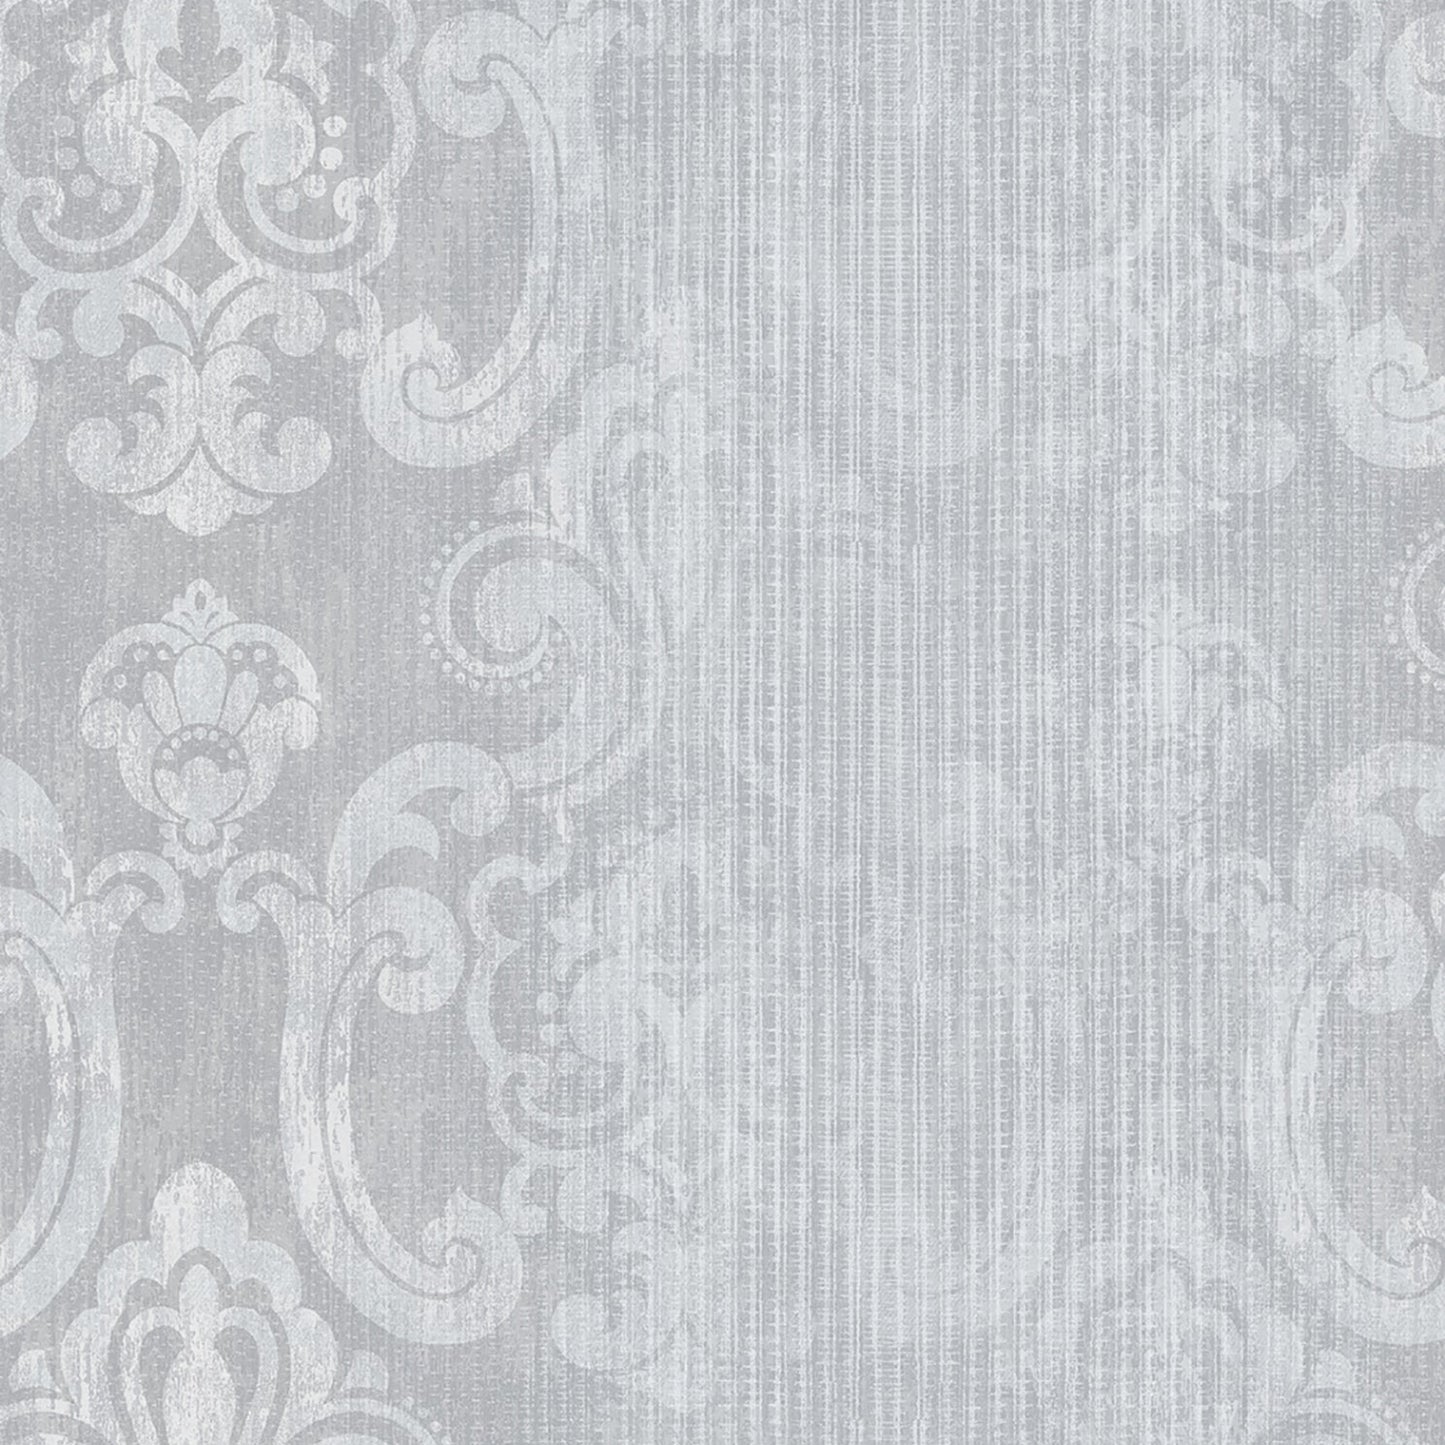 Find 2810-SH01043 Tradition Ariana Striped Damask by Advantage